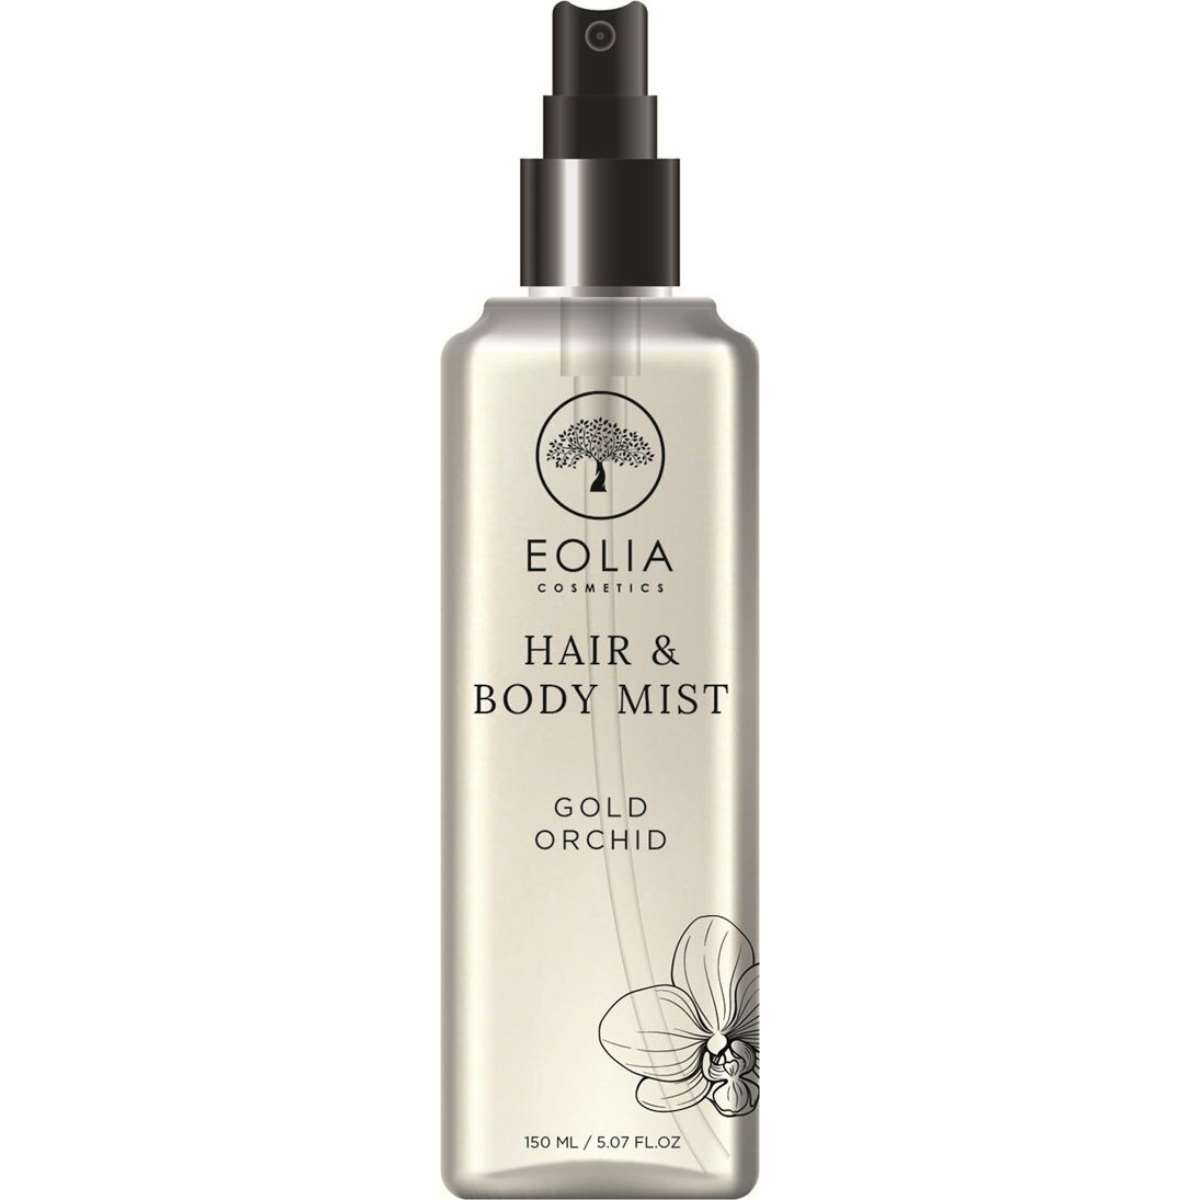 Eolia Cosmetics Gold Orchid Hair & Body Mist - Beauty & Beyond